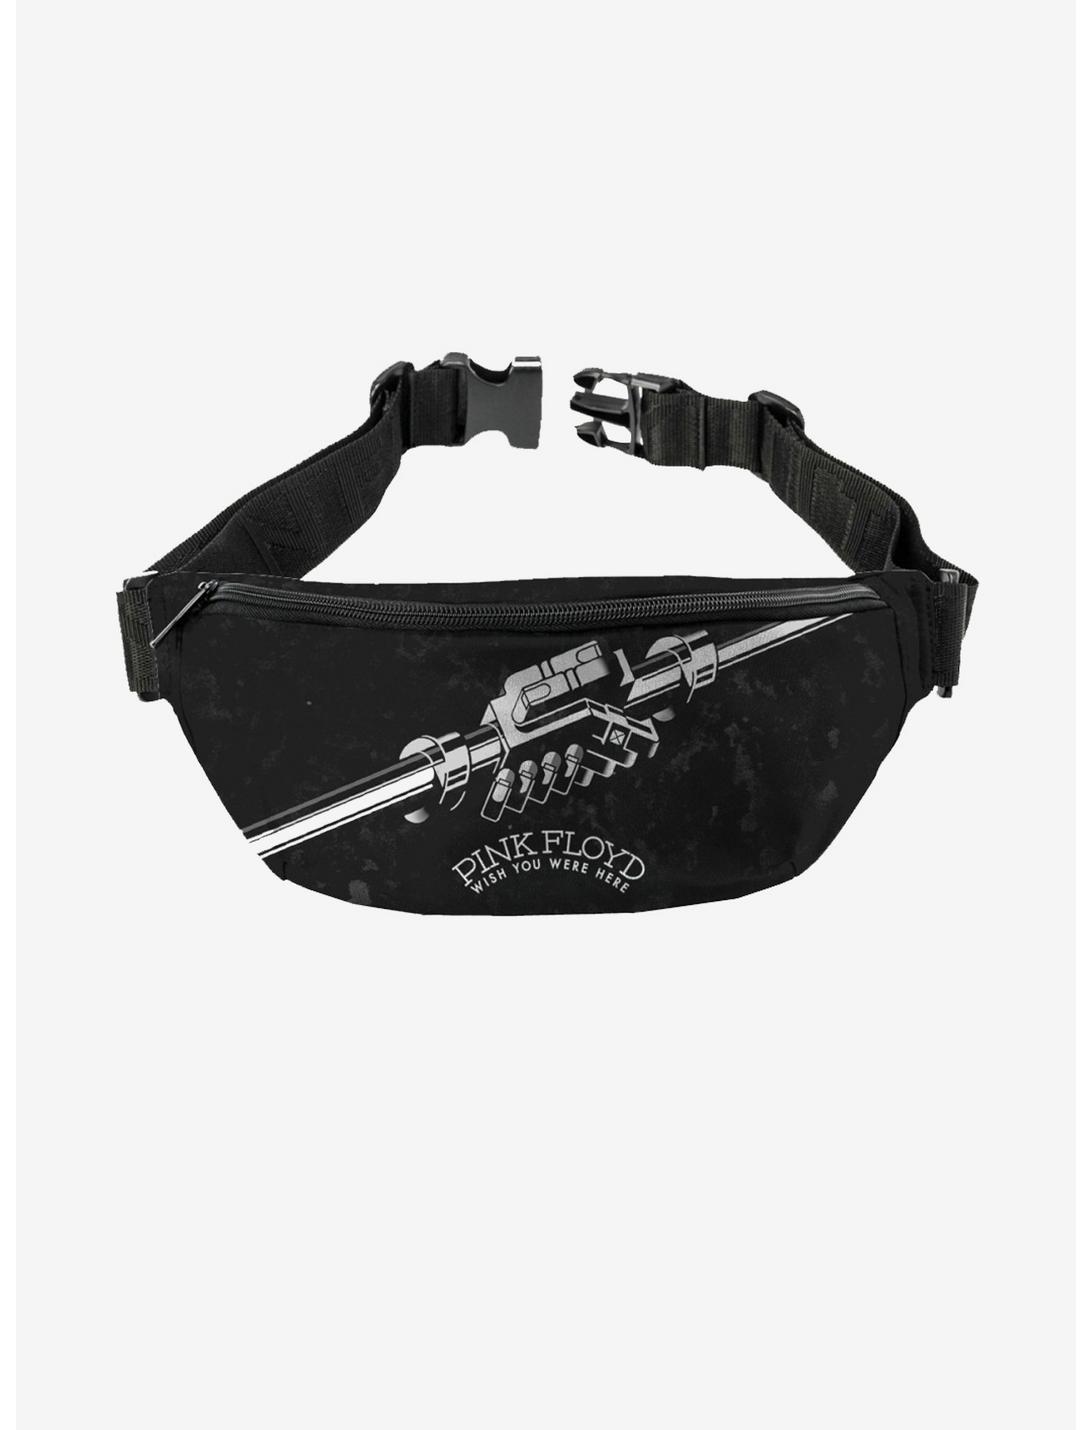 Rocksax Pink Floyd Wish You Were Here Black and White Fanny Pack, , hi-res